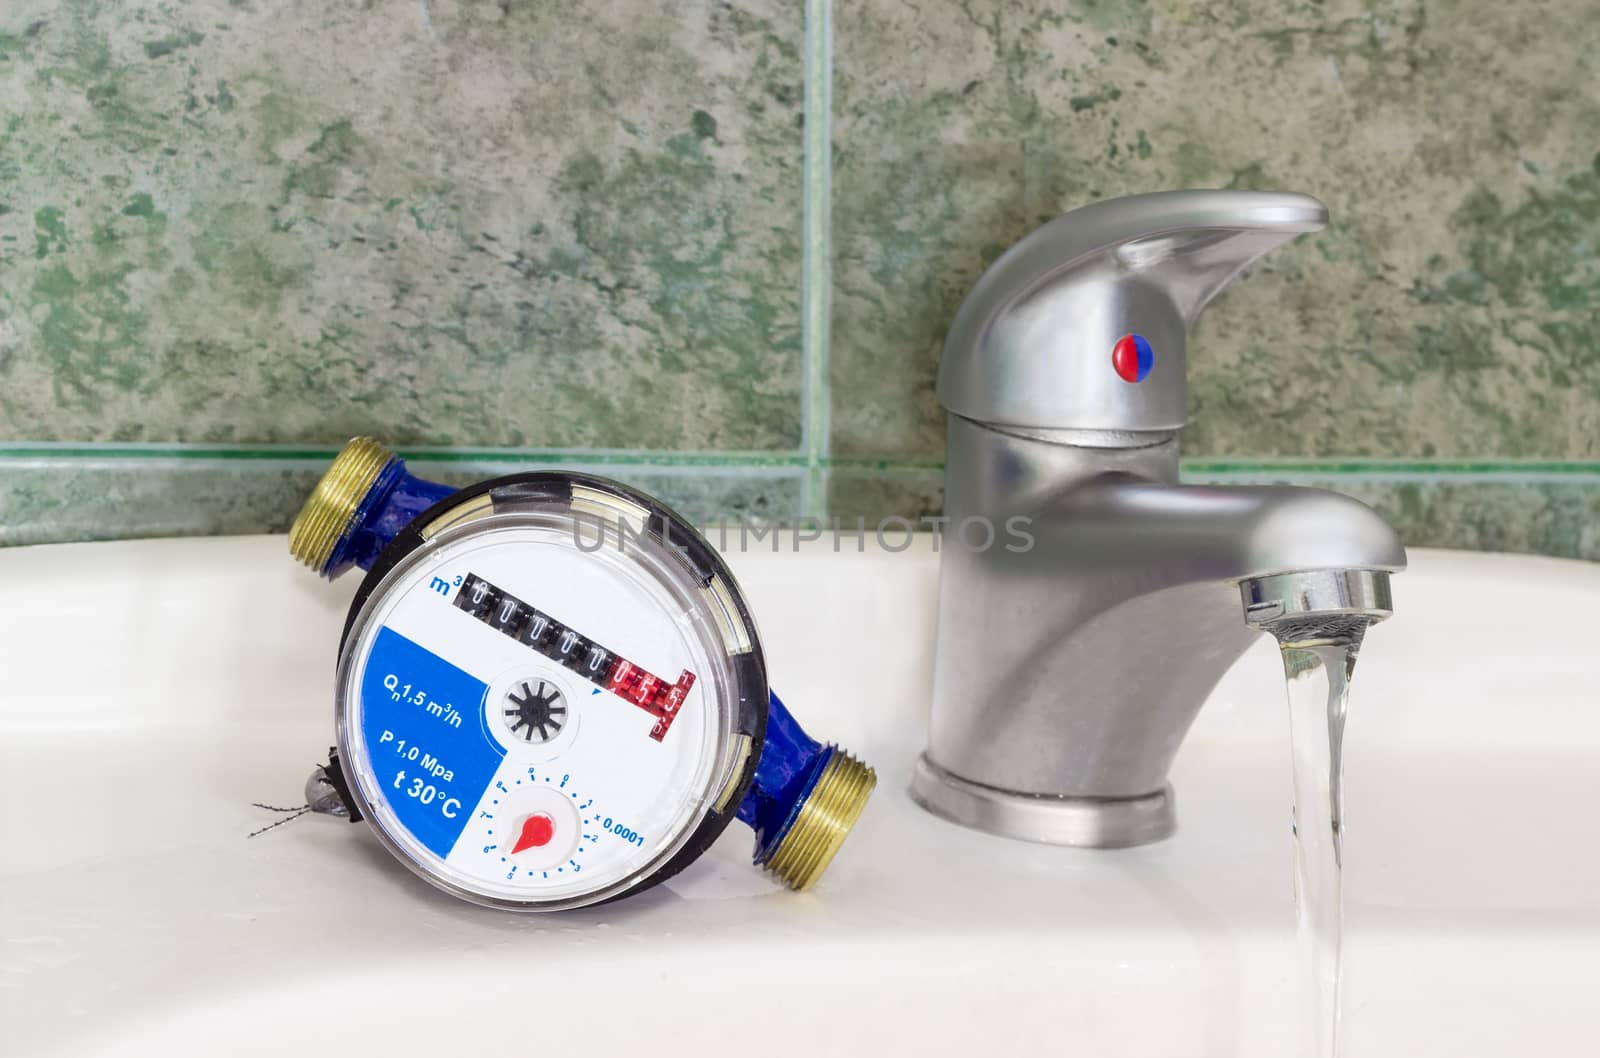 Not connected meter for consumption measuring of a cold water on a wash basin beside mounted handle mixer tap and water flowing from him on background of a wall with green tiles
